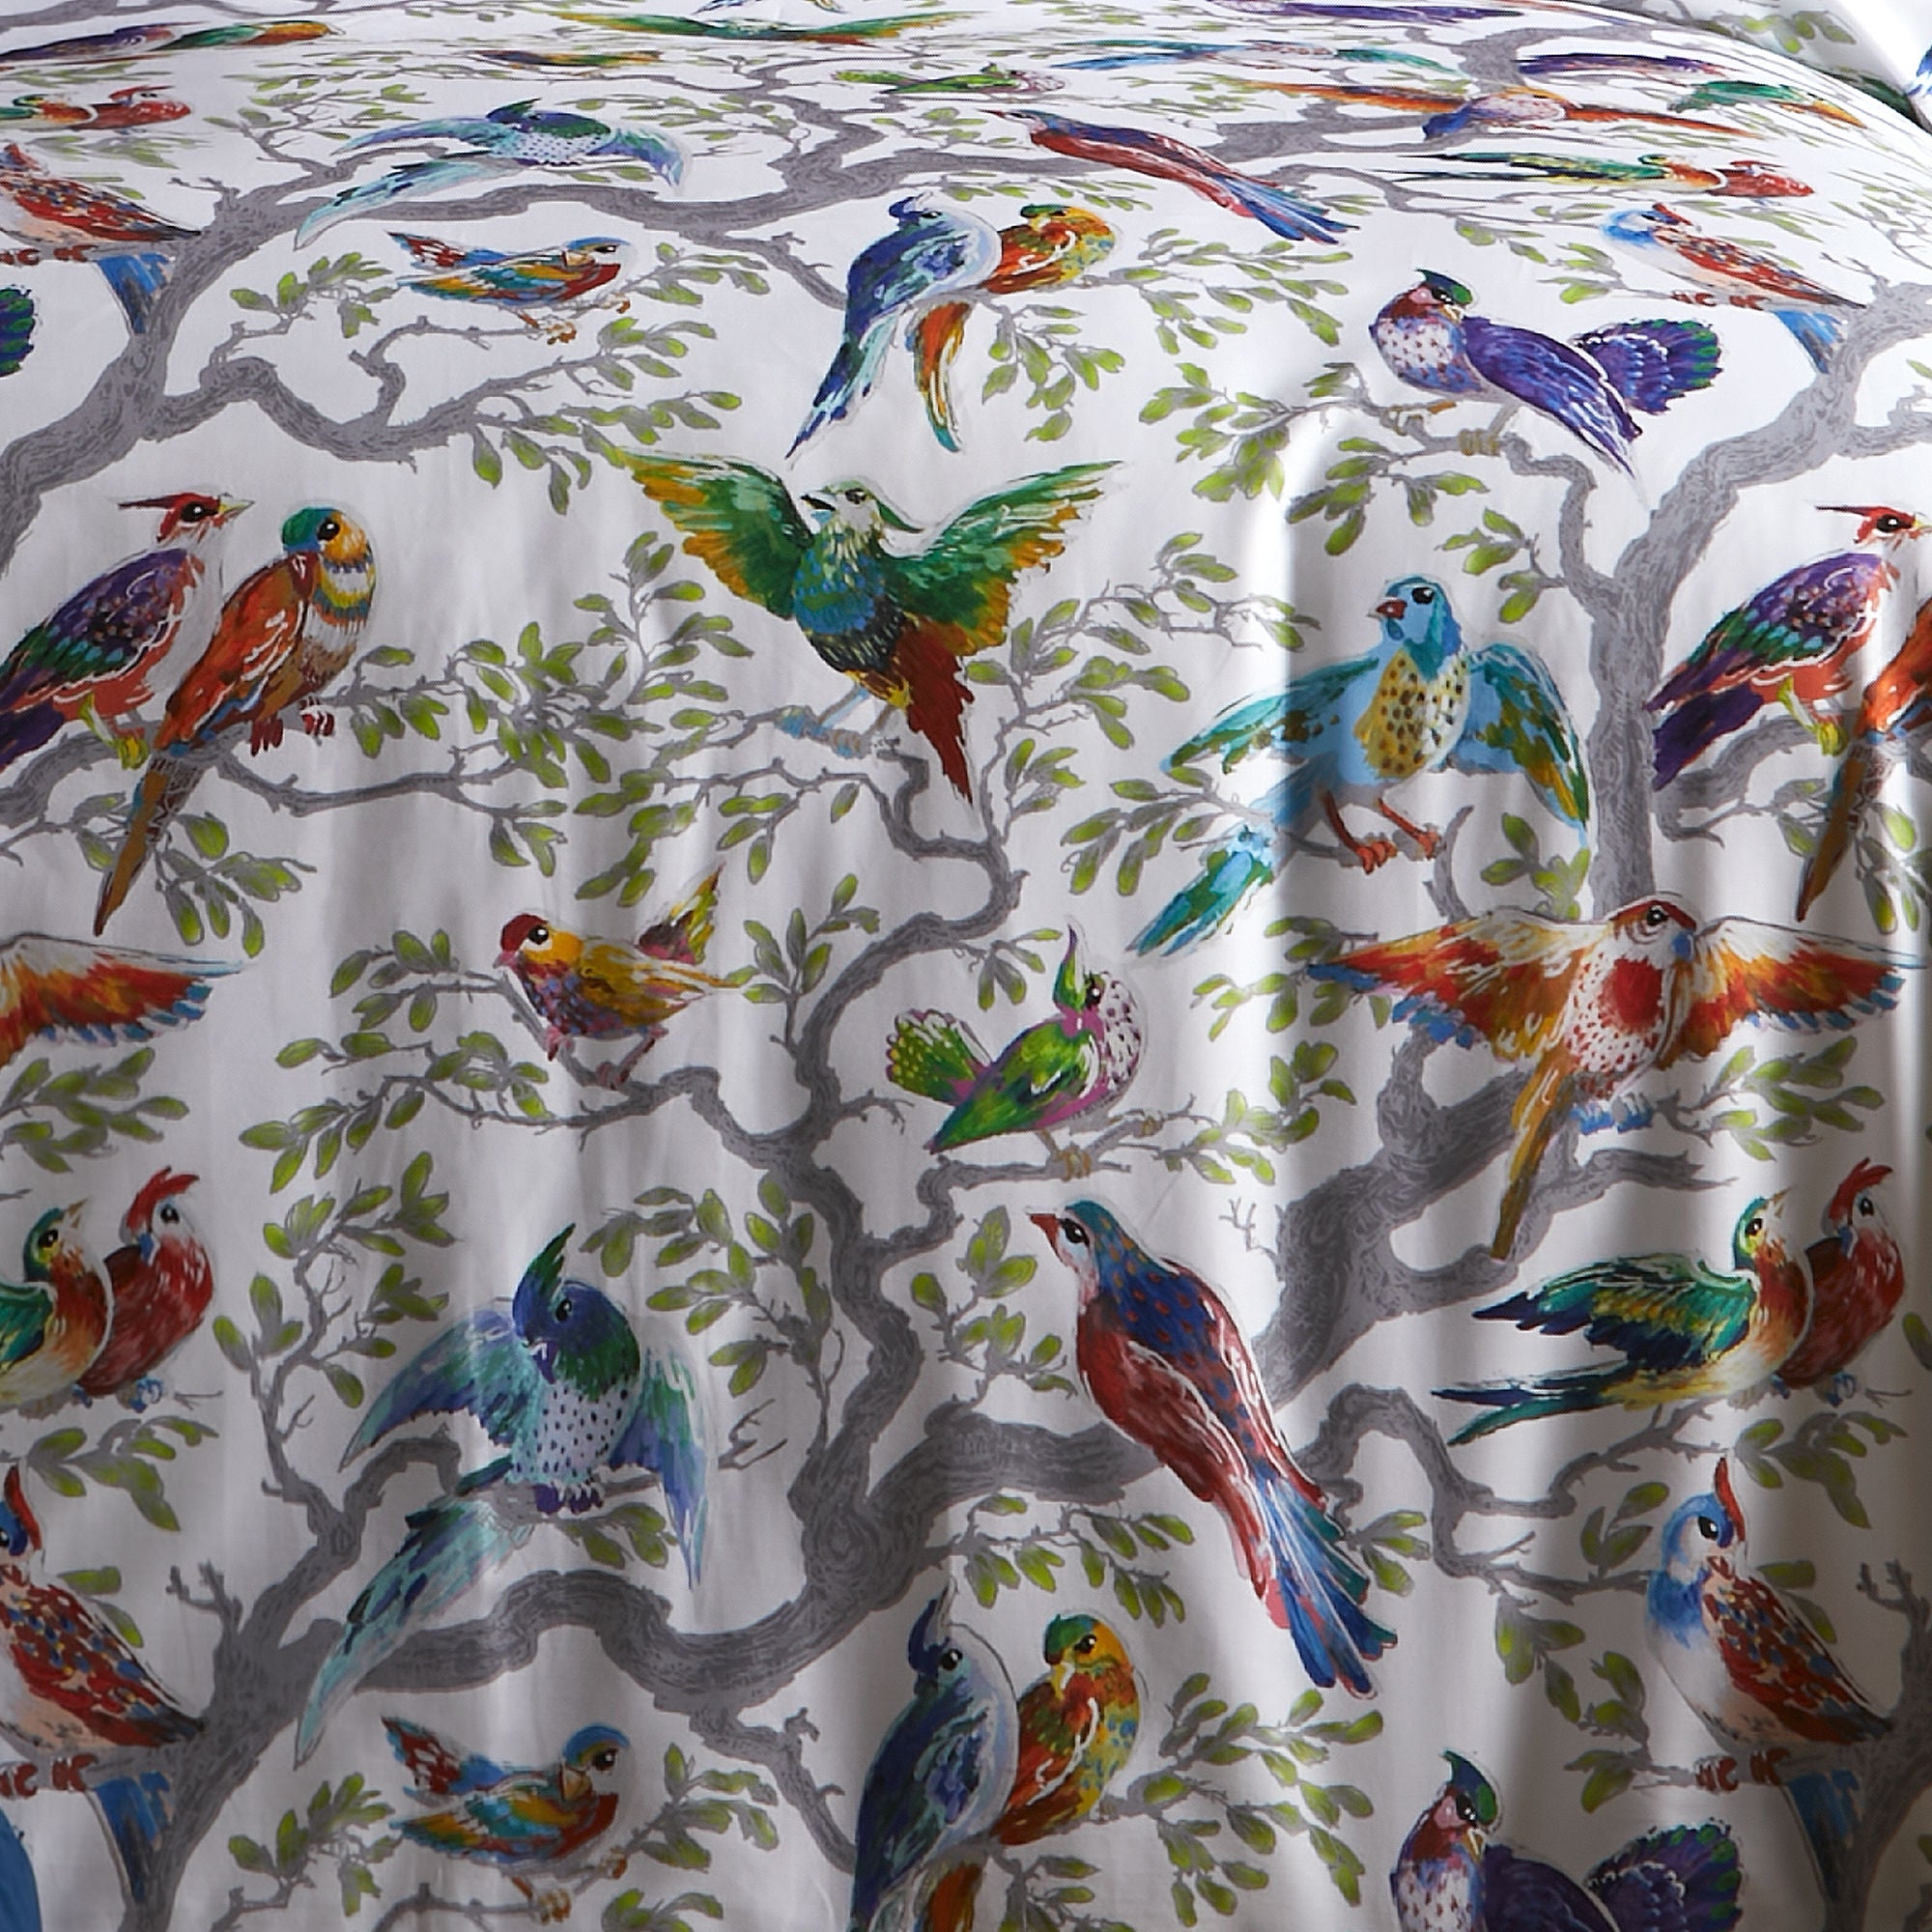 Birdity Absurdity Duvet Cover Set by Laurence Llewelyn-Bowen in Multi - Duvet Cover Set - Laurence Llewelyn-Bowen